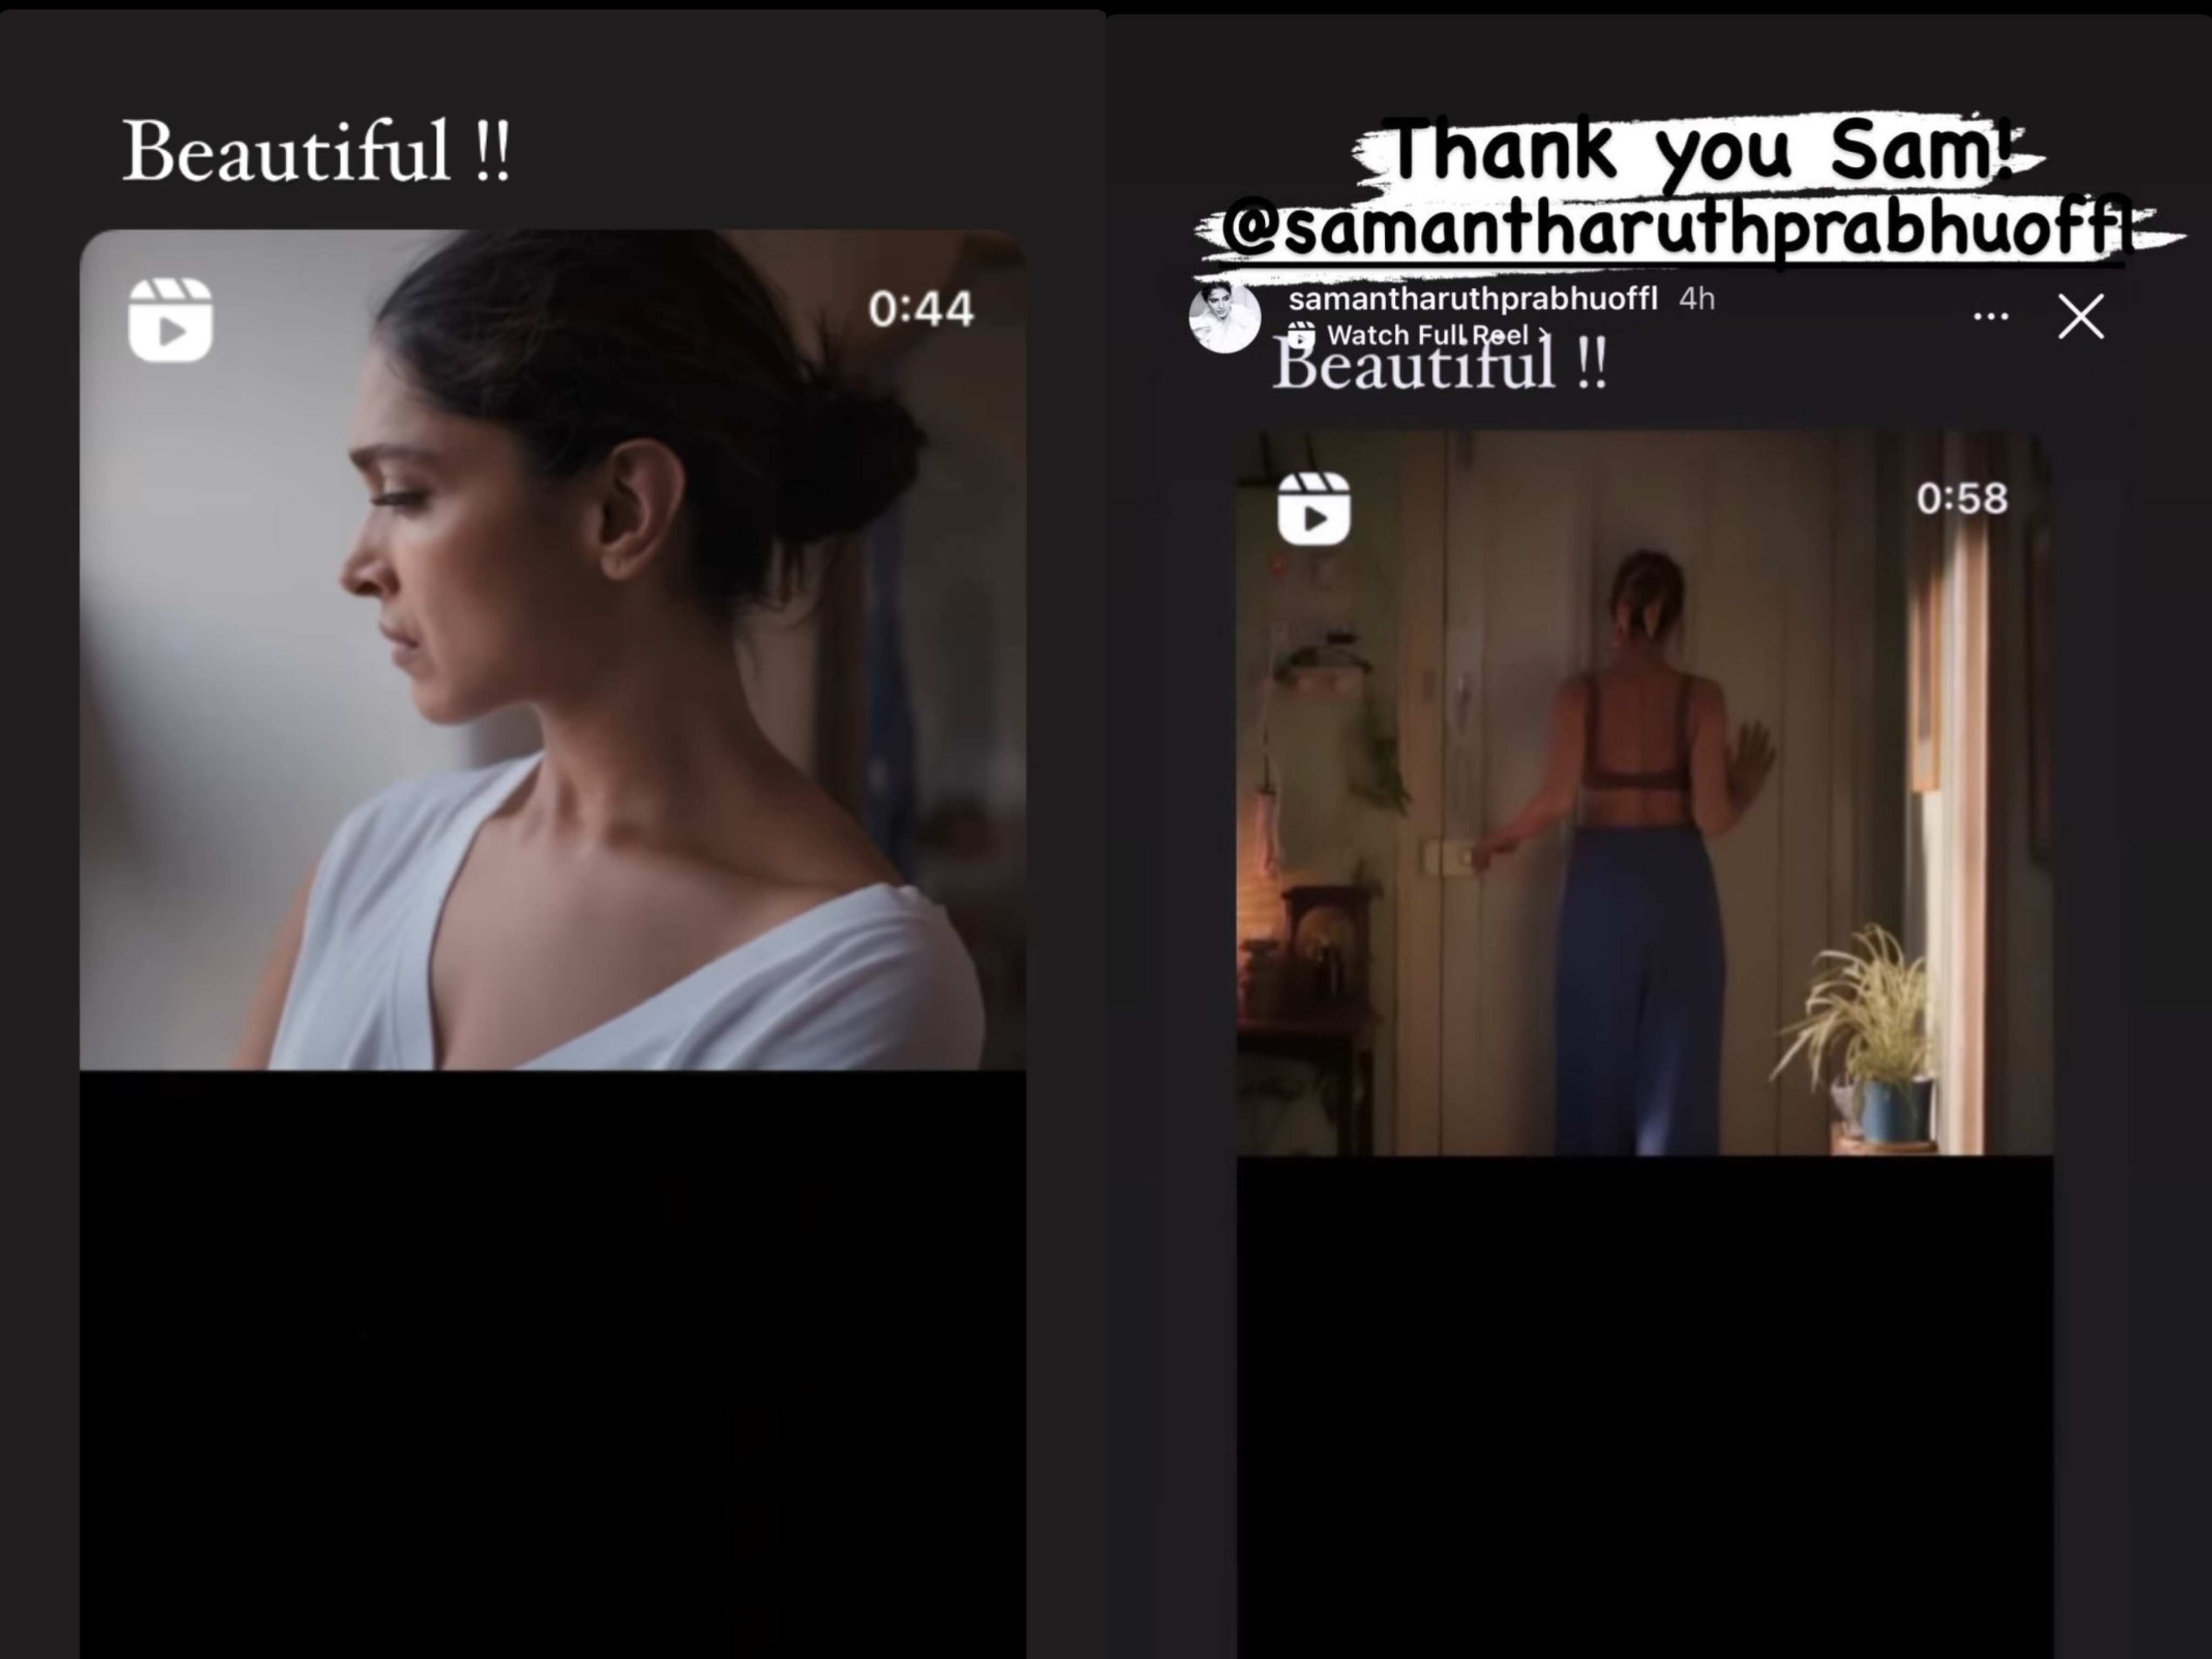 Deepika reacted to Samantha's gesture by thanking her on her own Insta story.